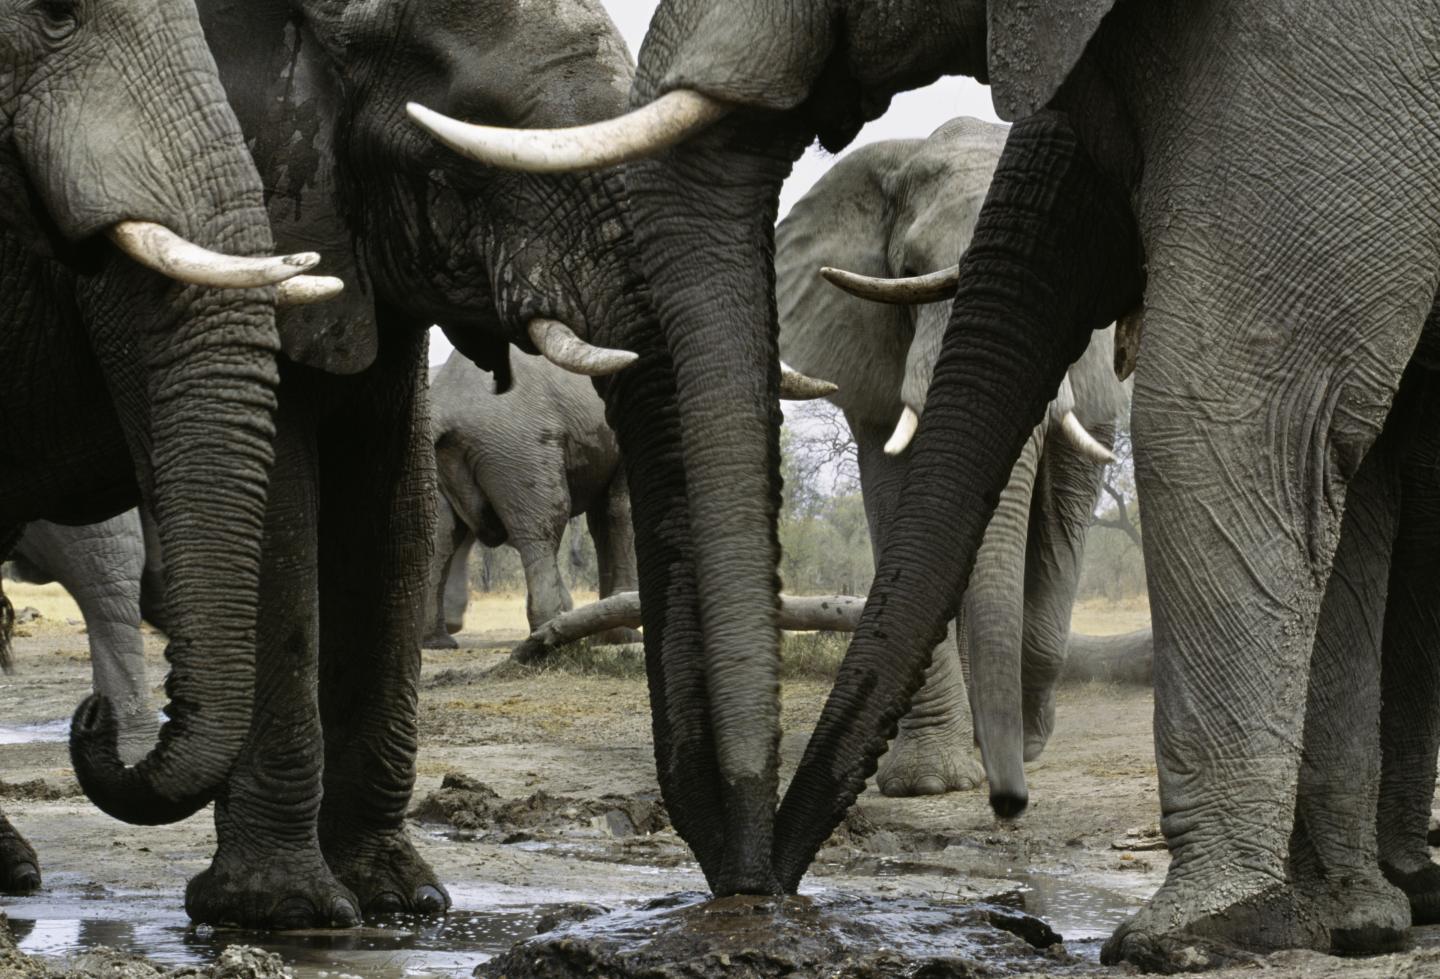 Two Groups that Want to Save Elephants Need to Find Common Ground